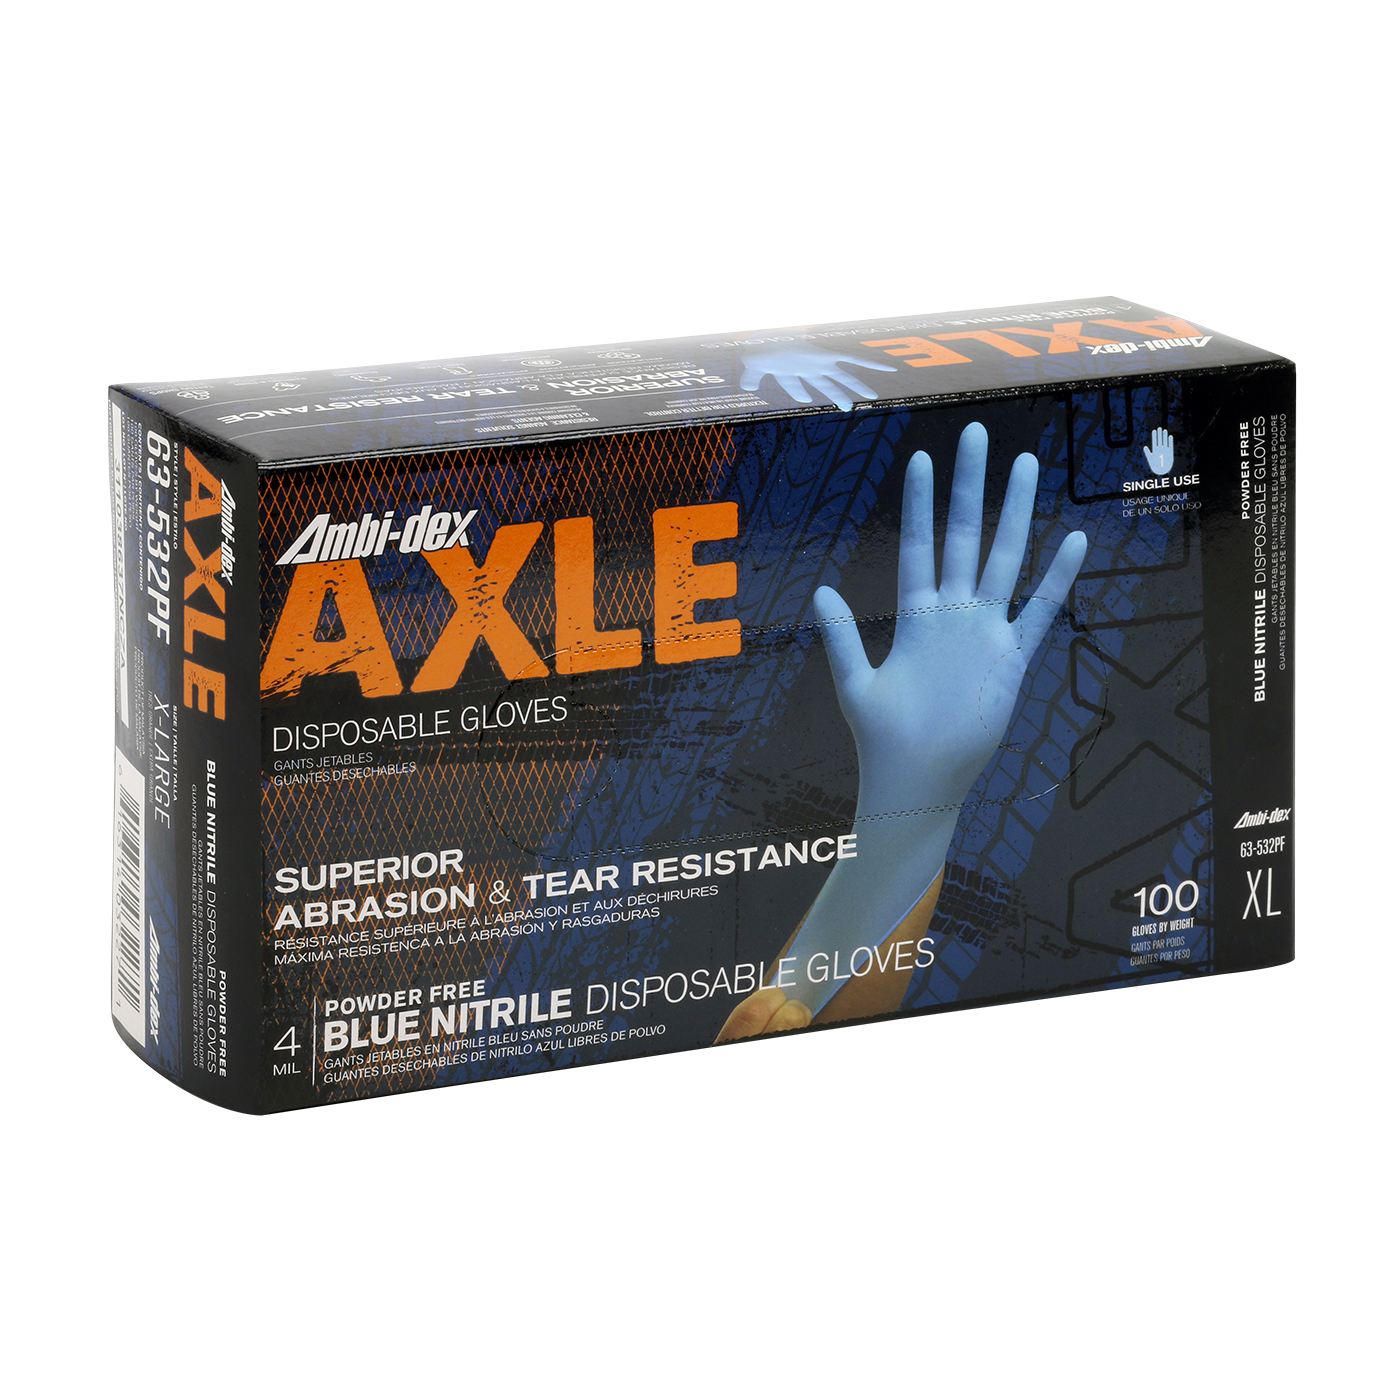 #63-532PF Ambi-dex® Axle Disposable Nitrile Glove, Powder-Free with Textured Grip - 4 mil